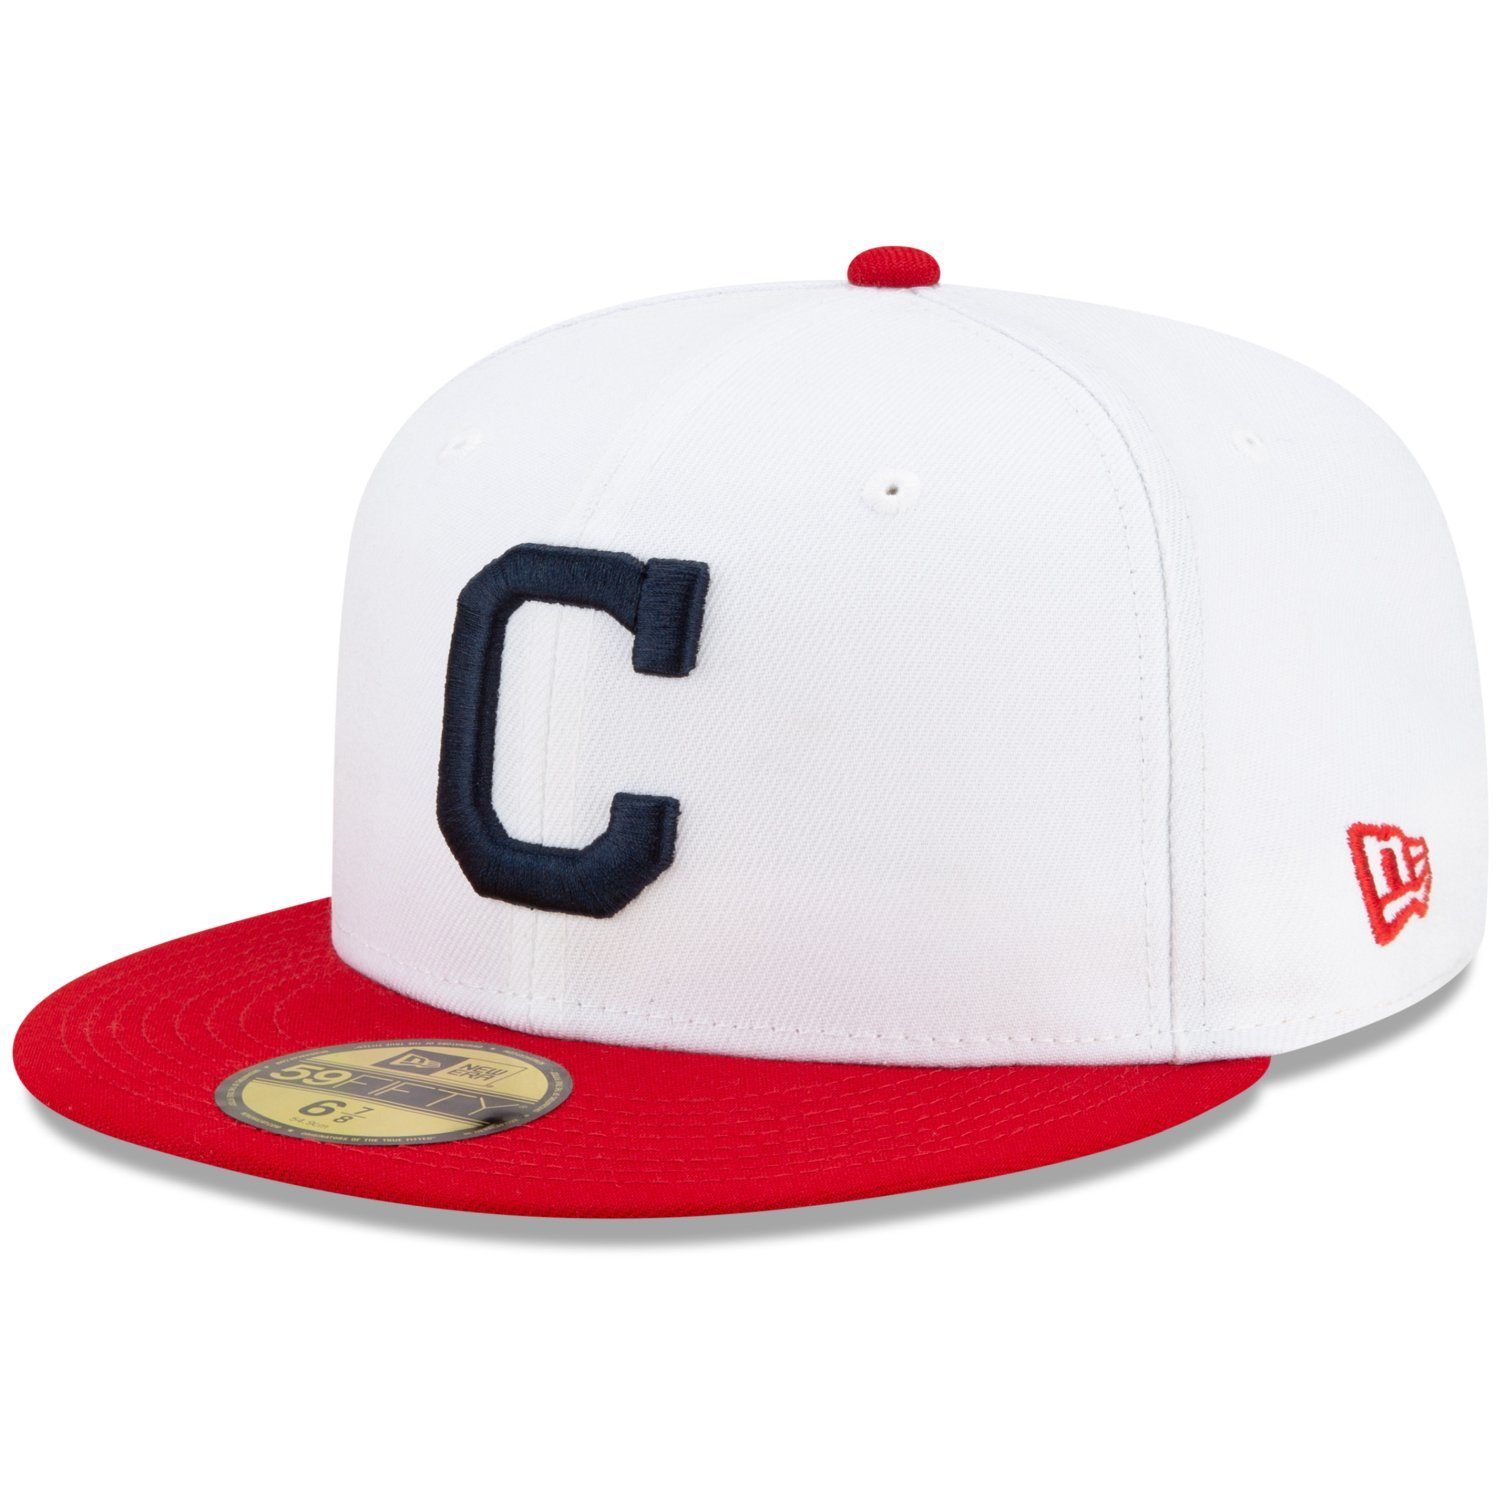 Fitted Indians SERIES 59Fifty WORLD Era New Cap 2016 Cleveland